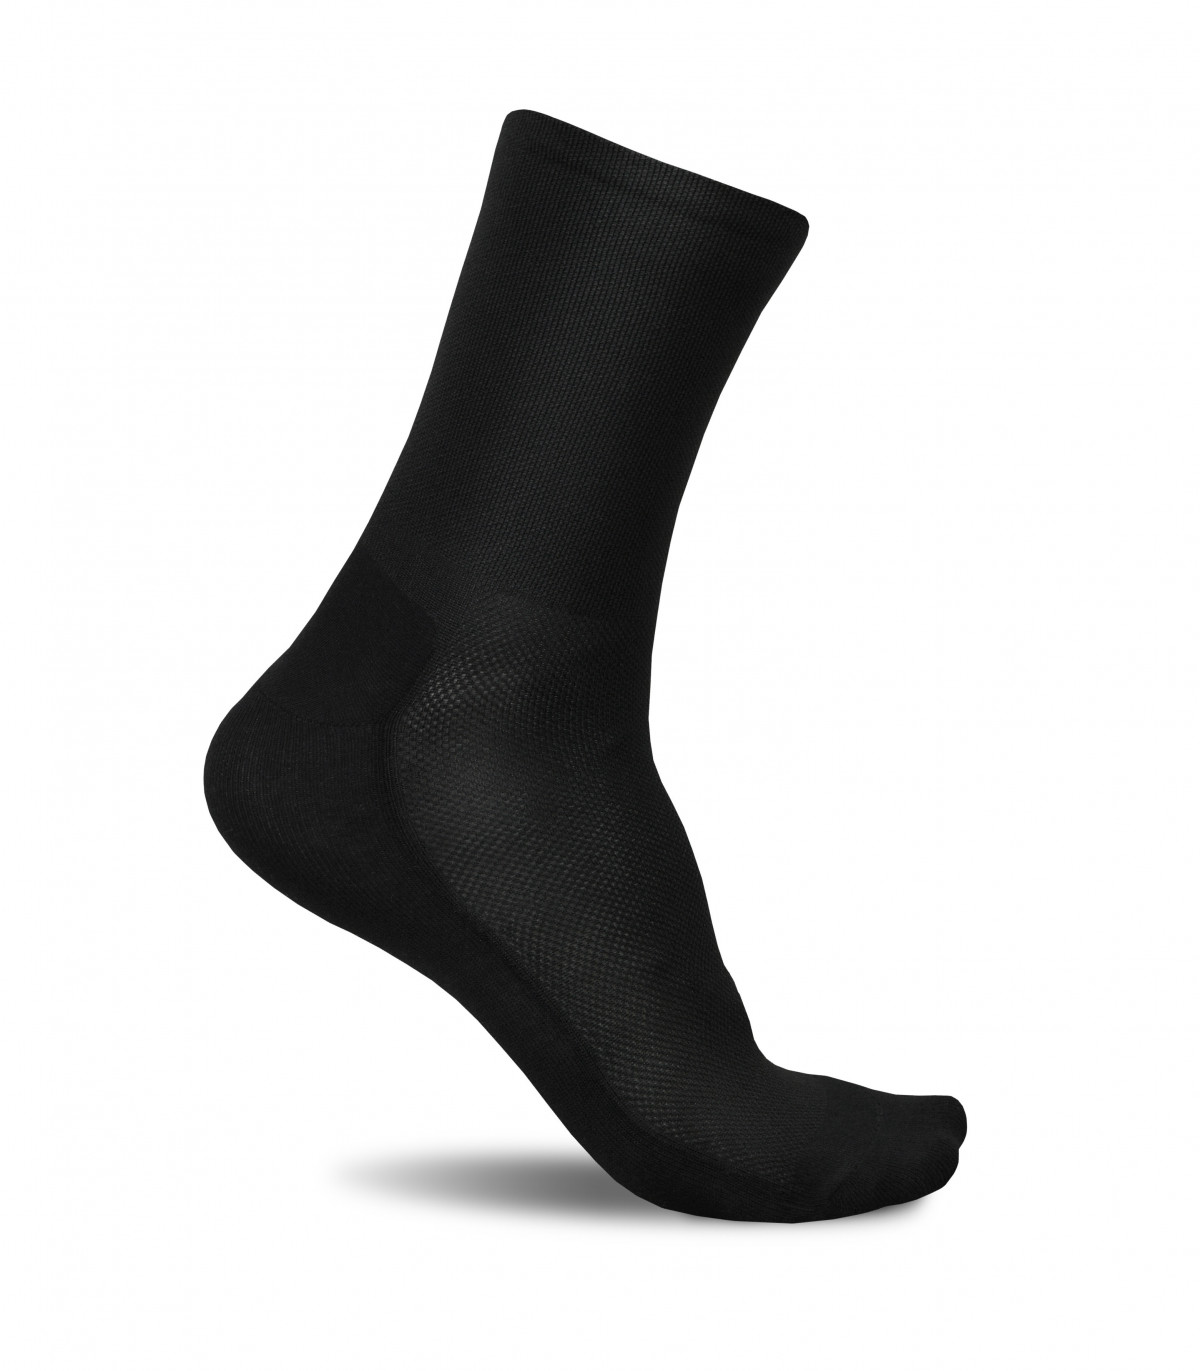 Details about   New Short Black Cycling Socks Size 7-13 